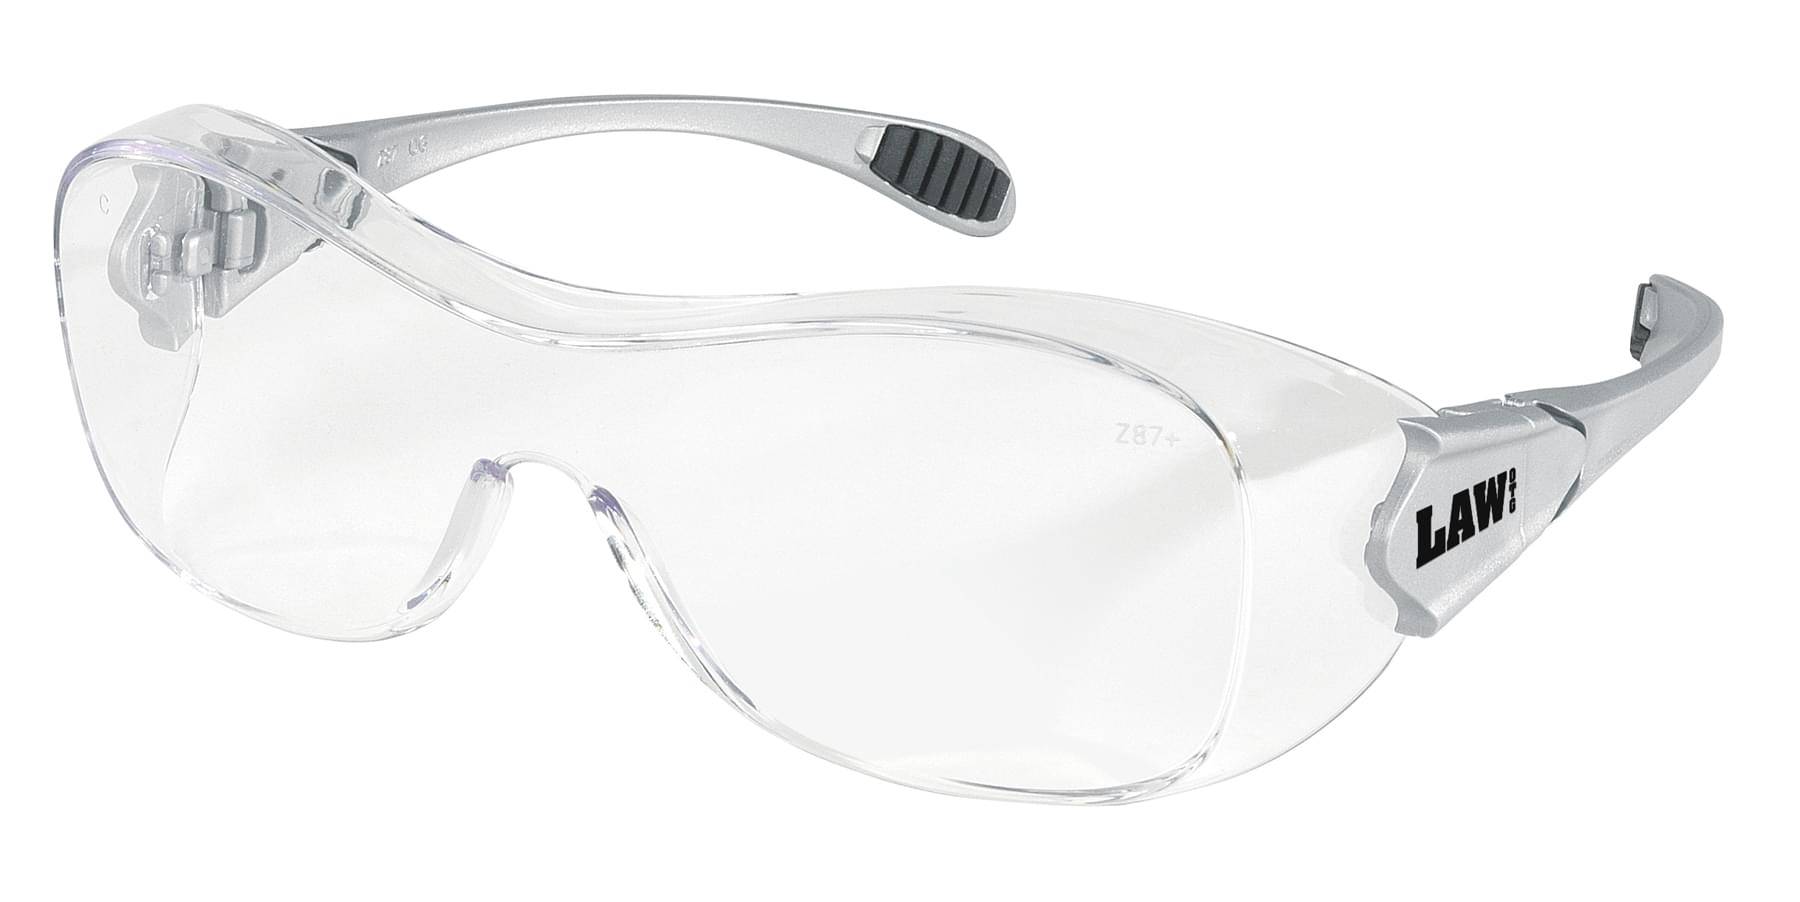 Glasses Safety Over The Glass Steel Temple Clear Anti-Fog Lens Dielectric Law